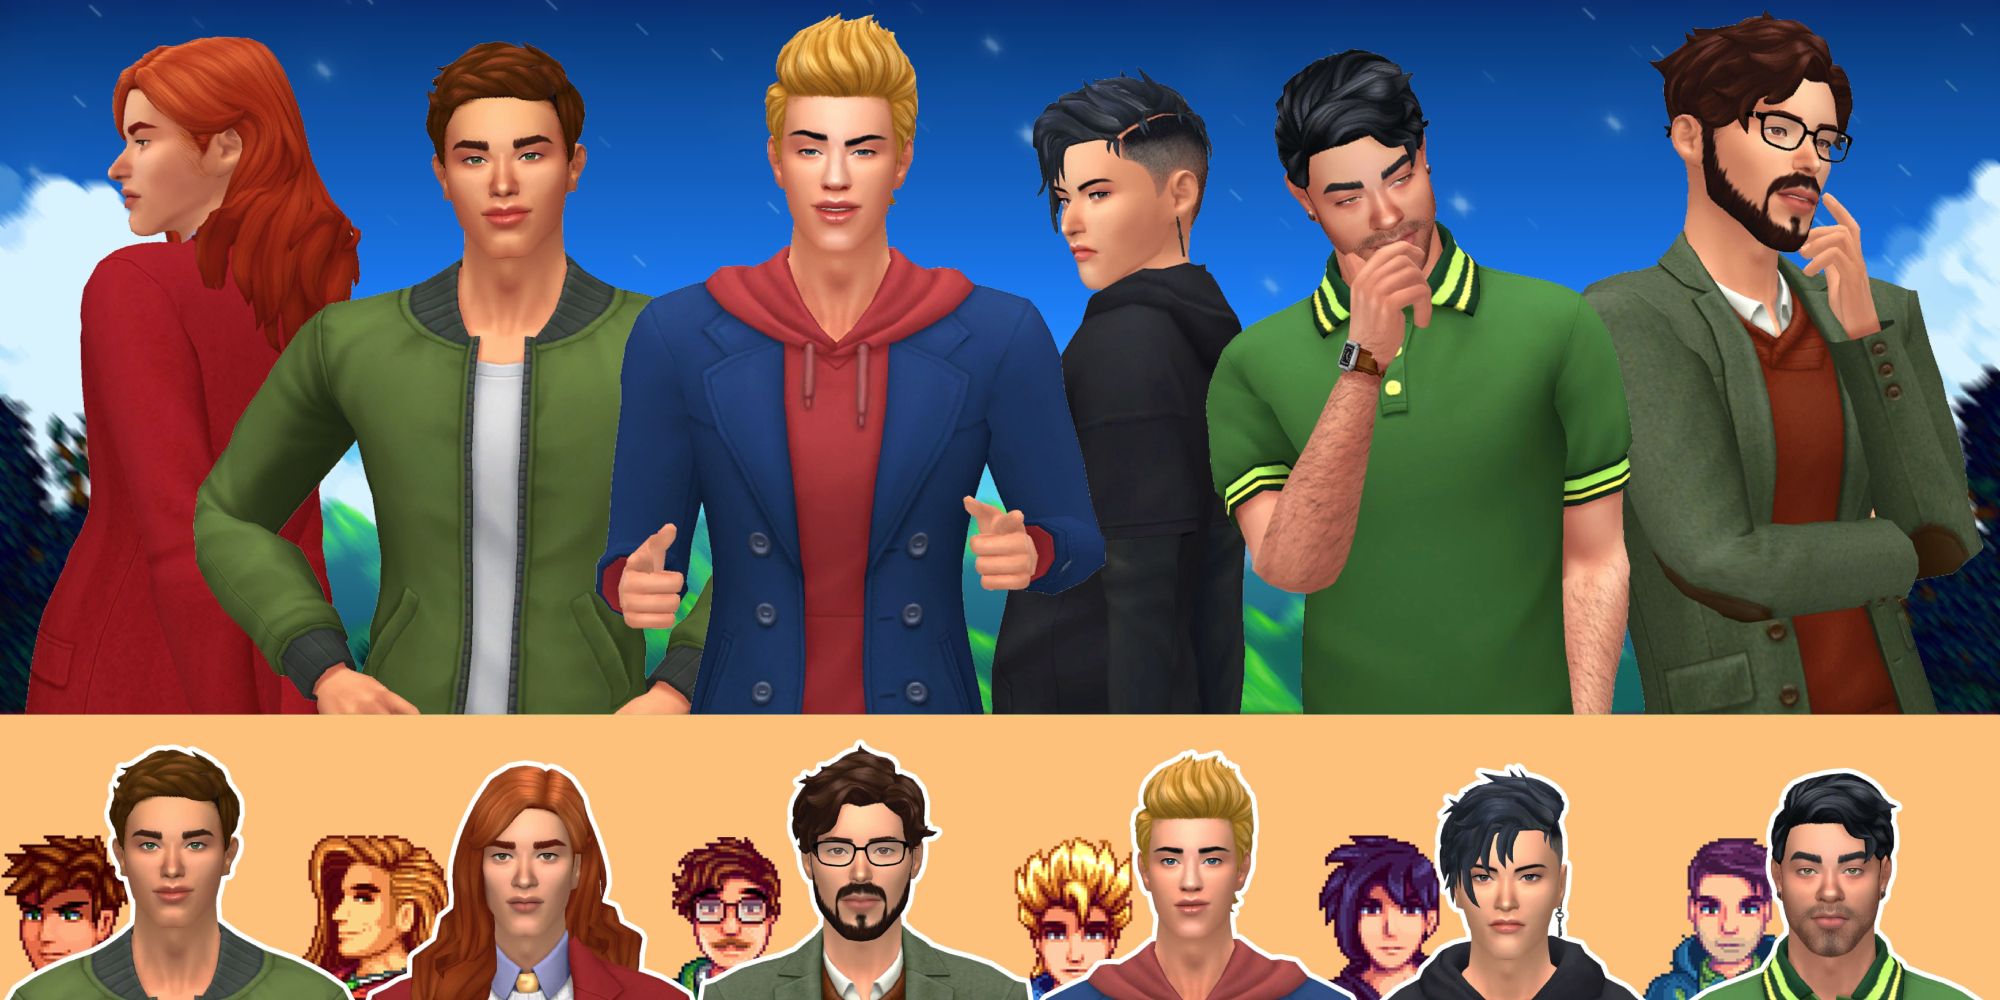 Bachelors from Stardew Valley made into The Sims 4 characters